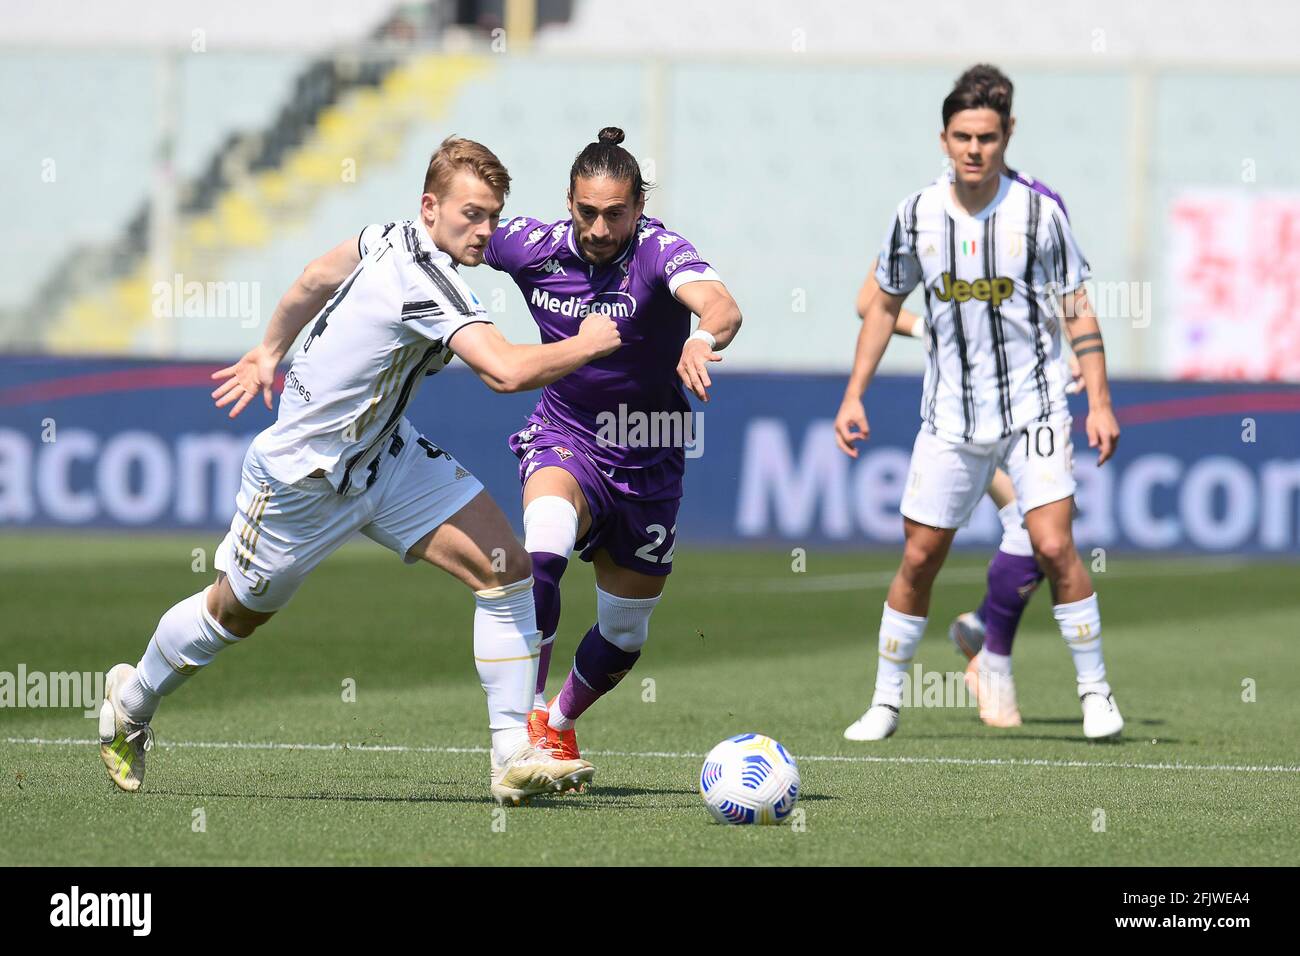 Florence, Italy. 25th Apr, 2021. Matthijs de Ligt (L) of FC Juventus and Martin Caceres (C) of ACF Fiorentina during the Serie A match between ACF Fiorentina and FC Juventus at Stadio Artemio Franchi, Florence, Italy on 25 April 2021. (Photo by Roberto Ramaccia/INA Photo Agency) Credit: Sipa USA/Alamy Live News Stock Photo